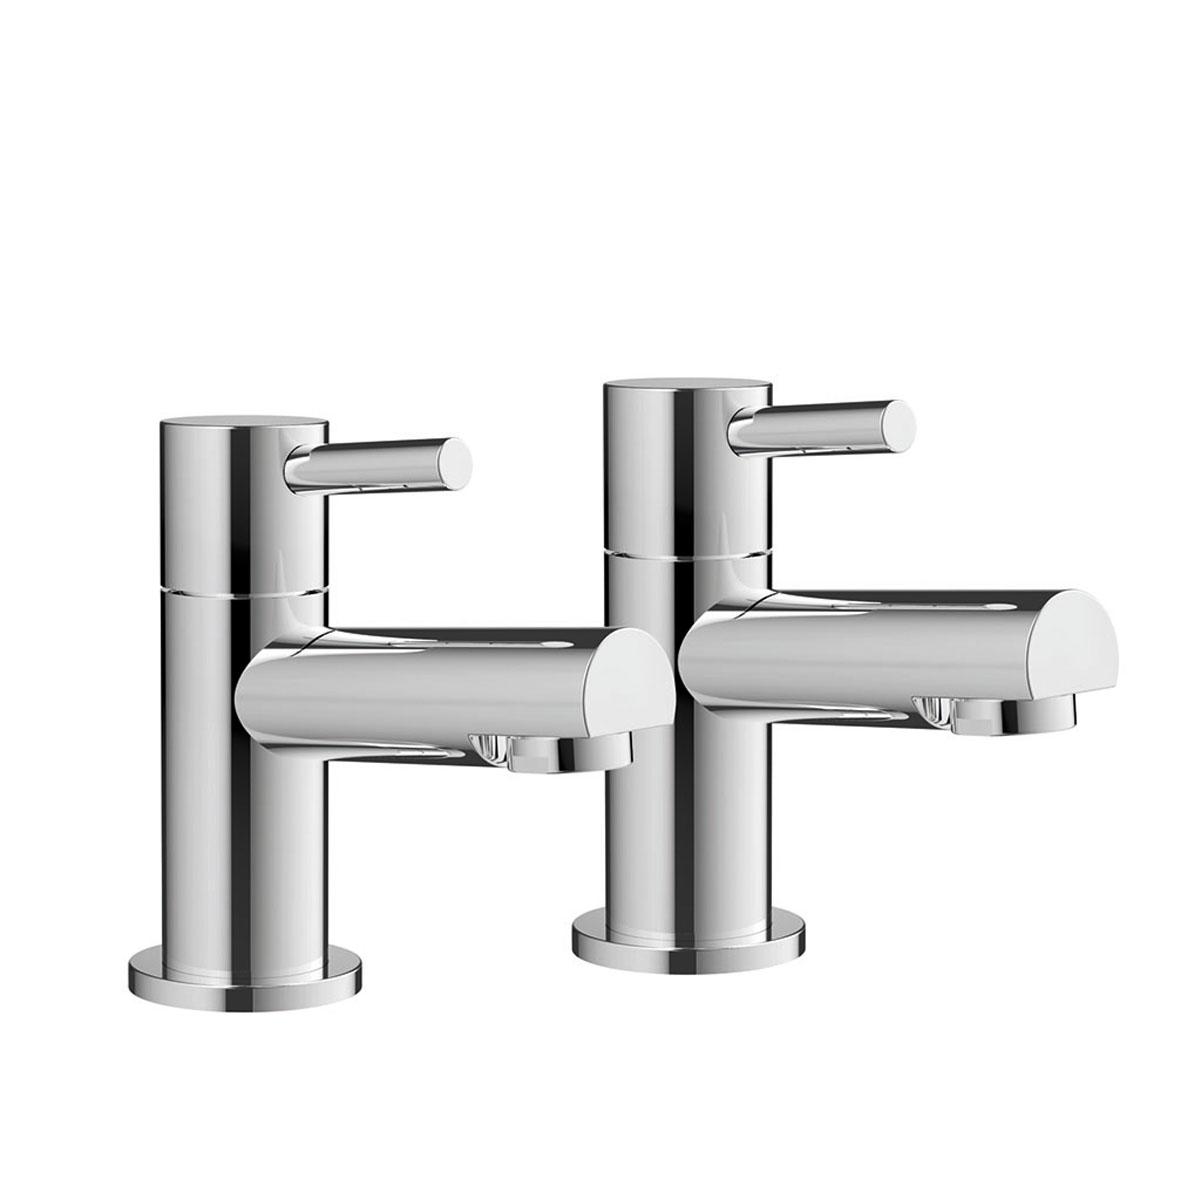 An image of Zico Pair Of Chrome Modern Lever Handle Basin Pillar Taps No Waste